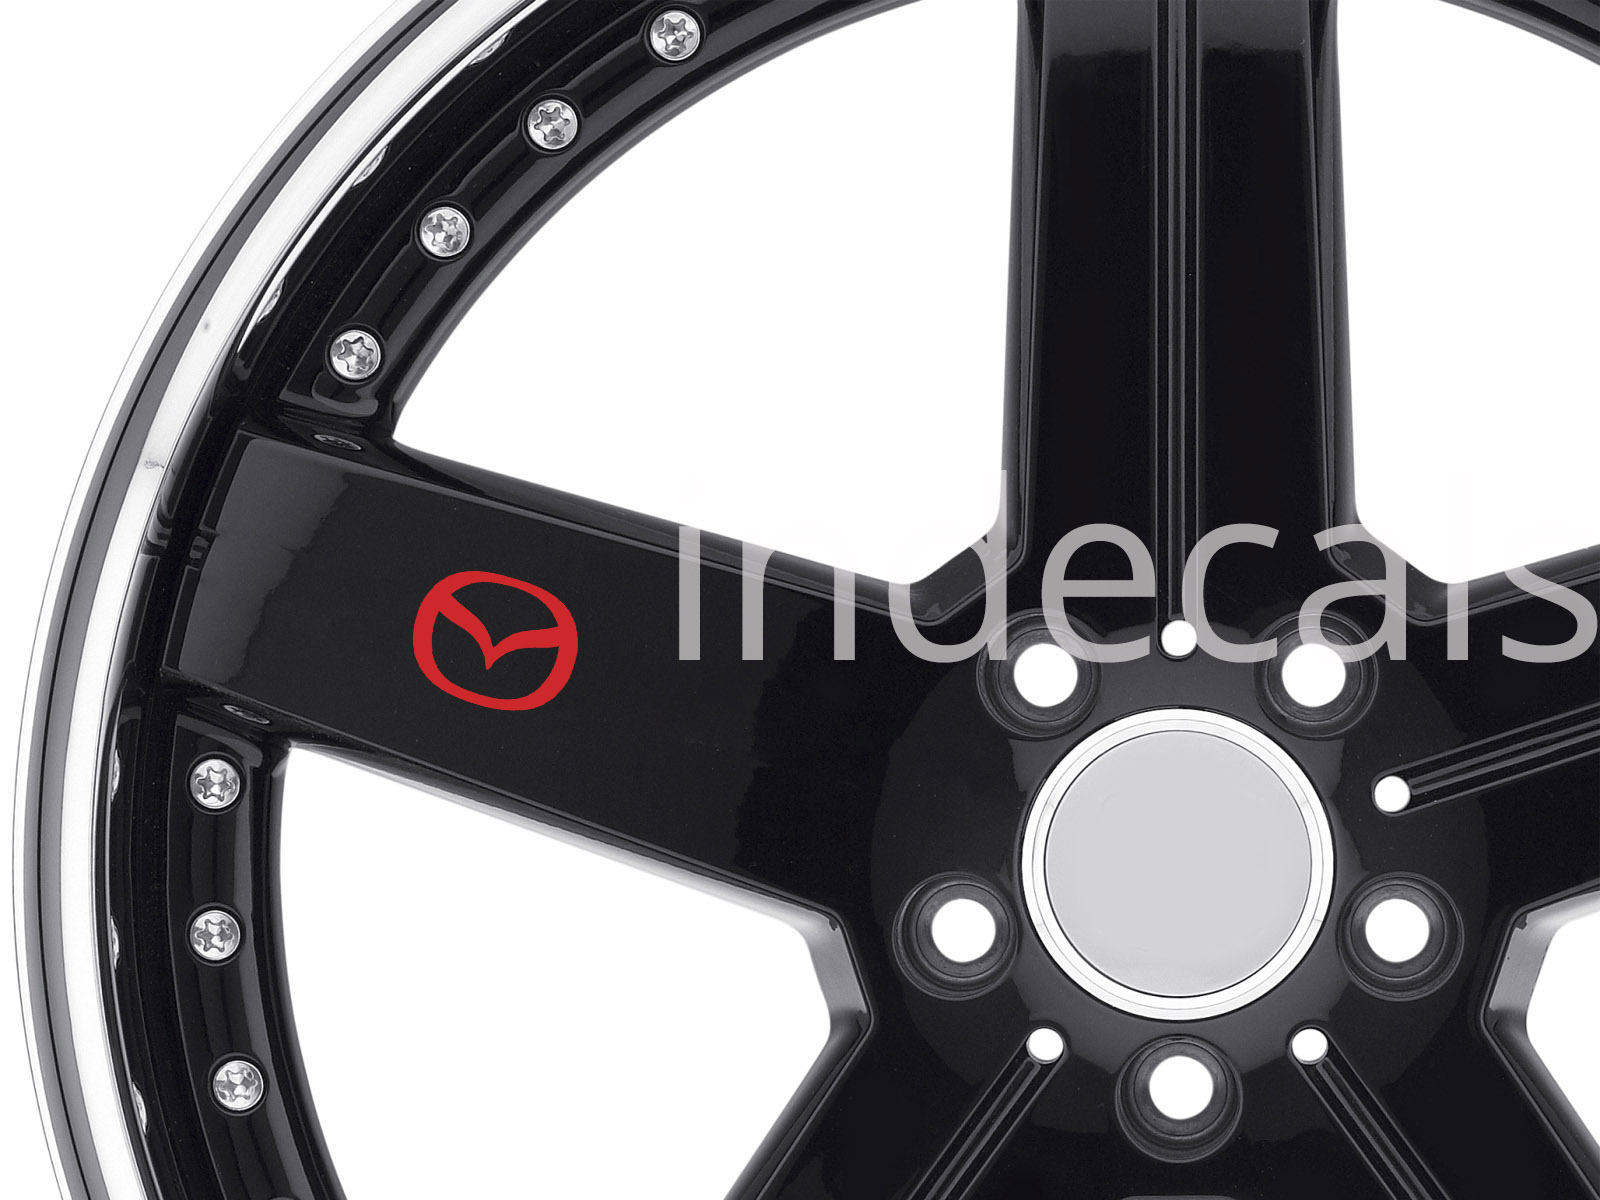 6 x Mazda Stickers for Wheels - Red